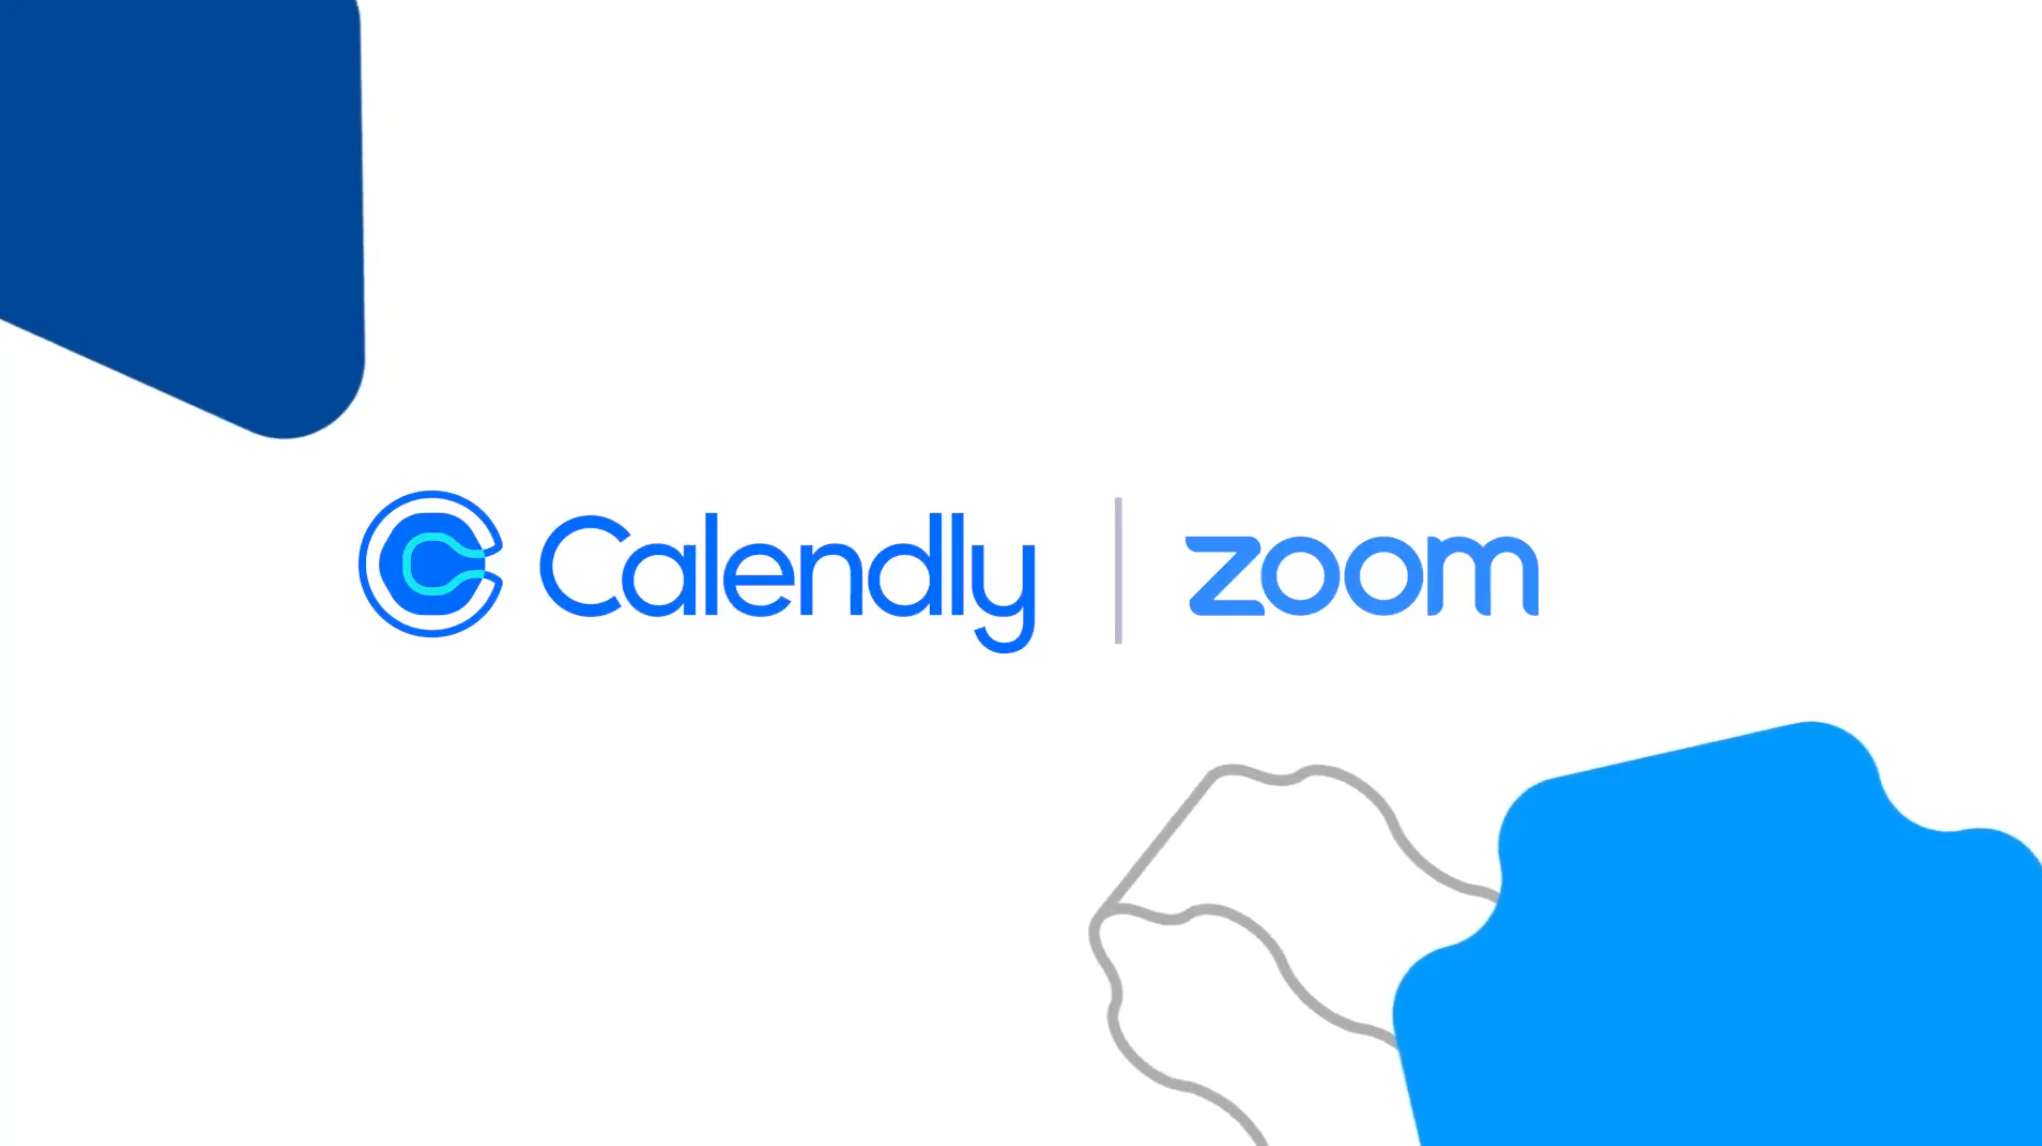 Calendly Zoom Integration Video